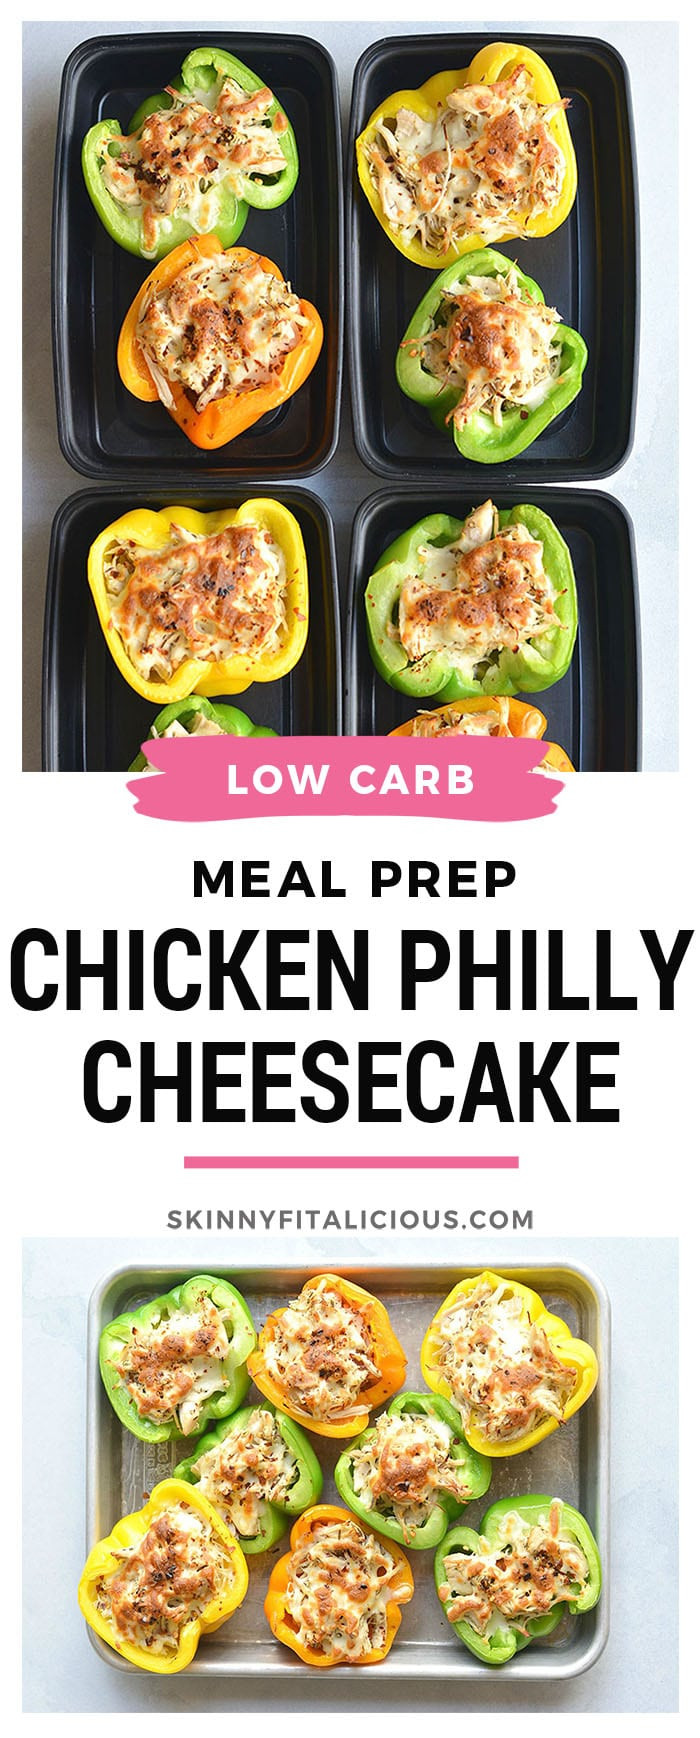 Low Calorie Meal Prep Recipes
 Meal Prep Chicken Philly Cheesesteak Low Carb GF Low